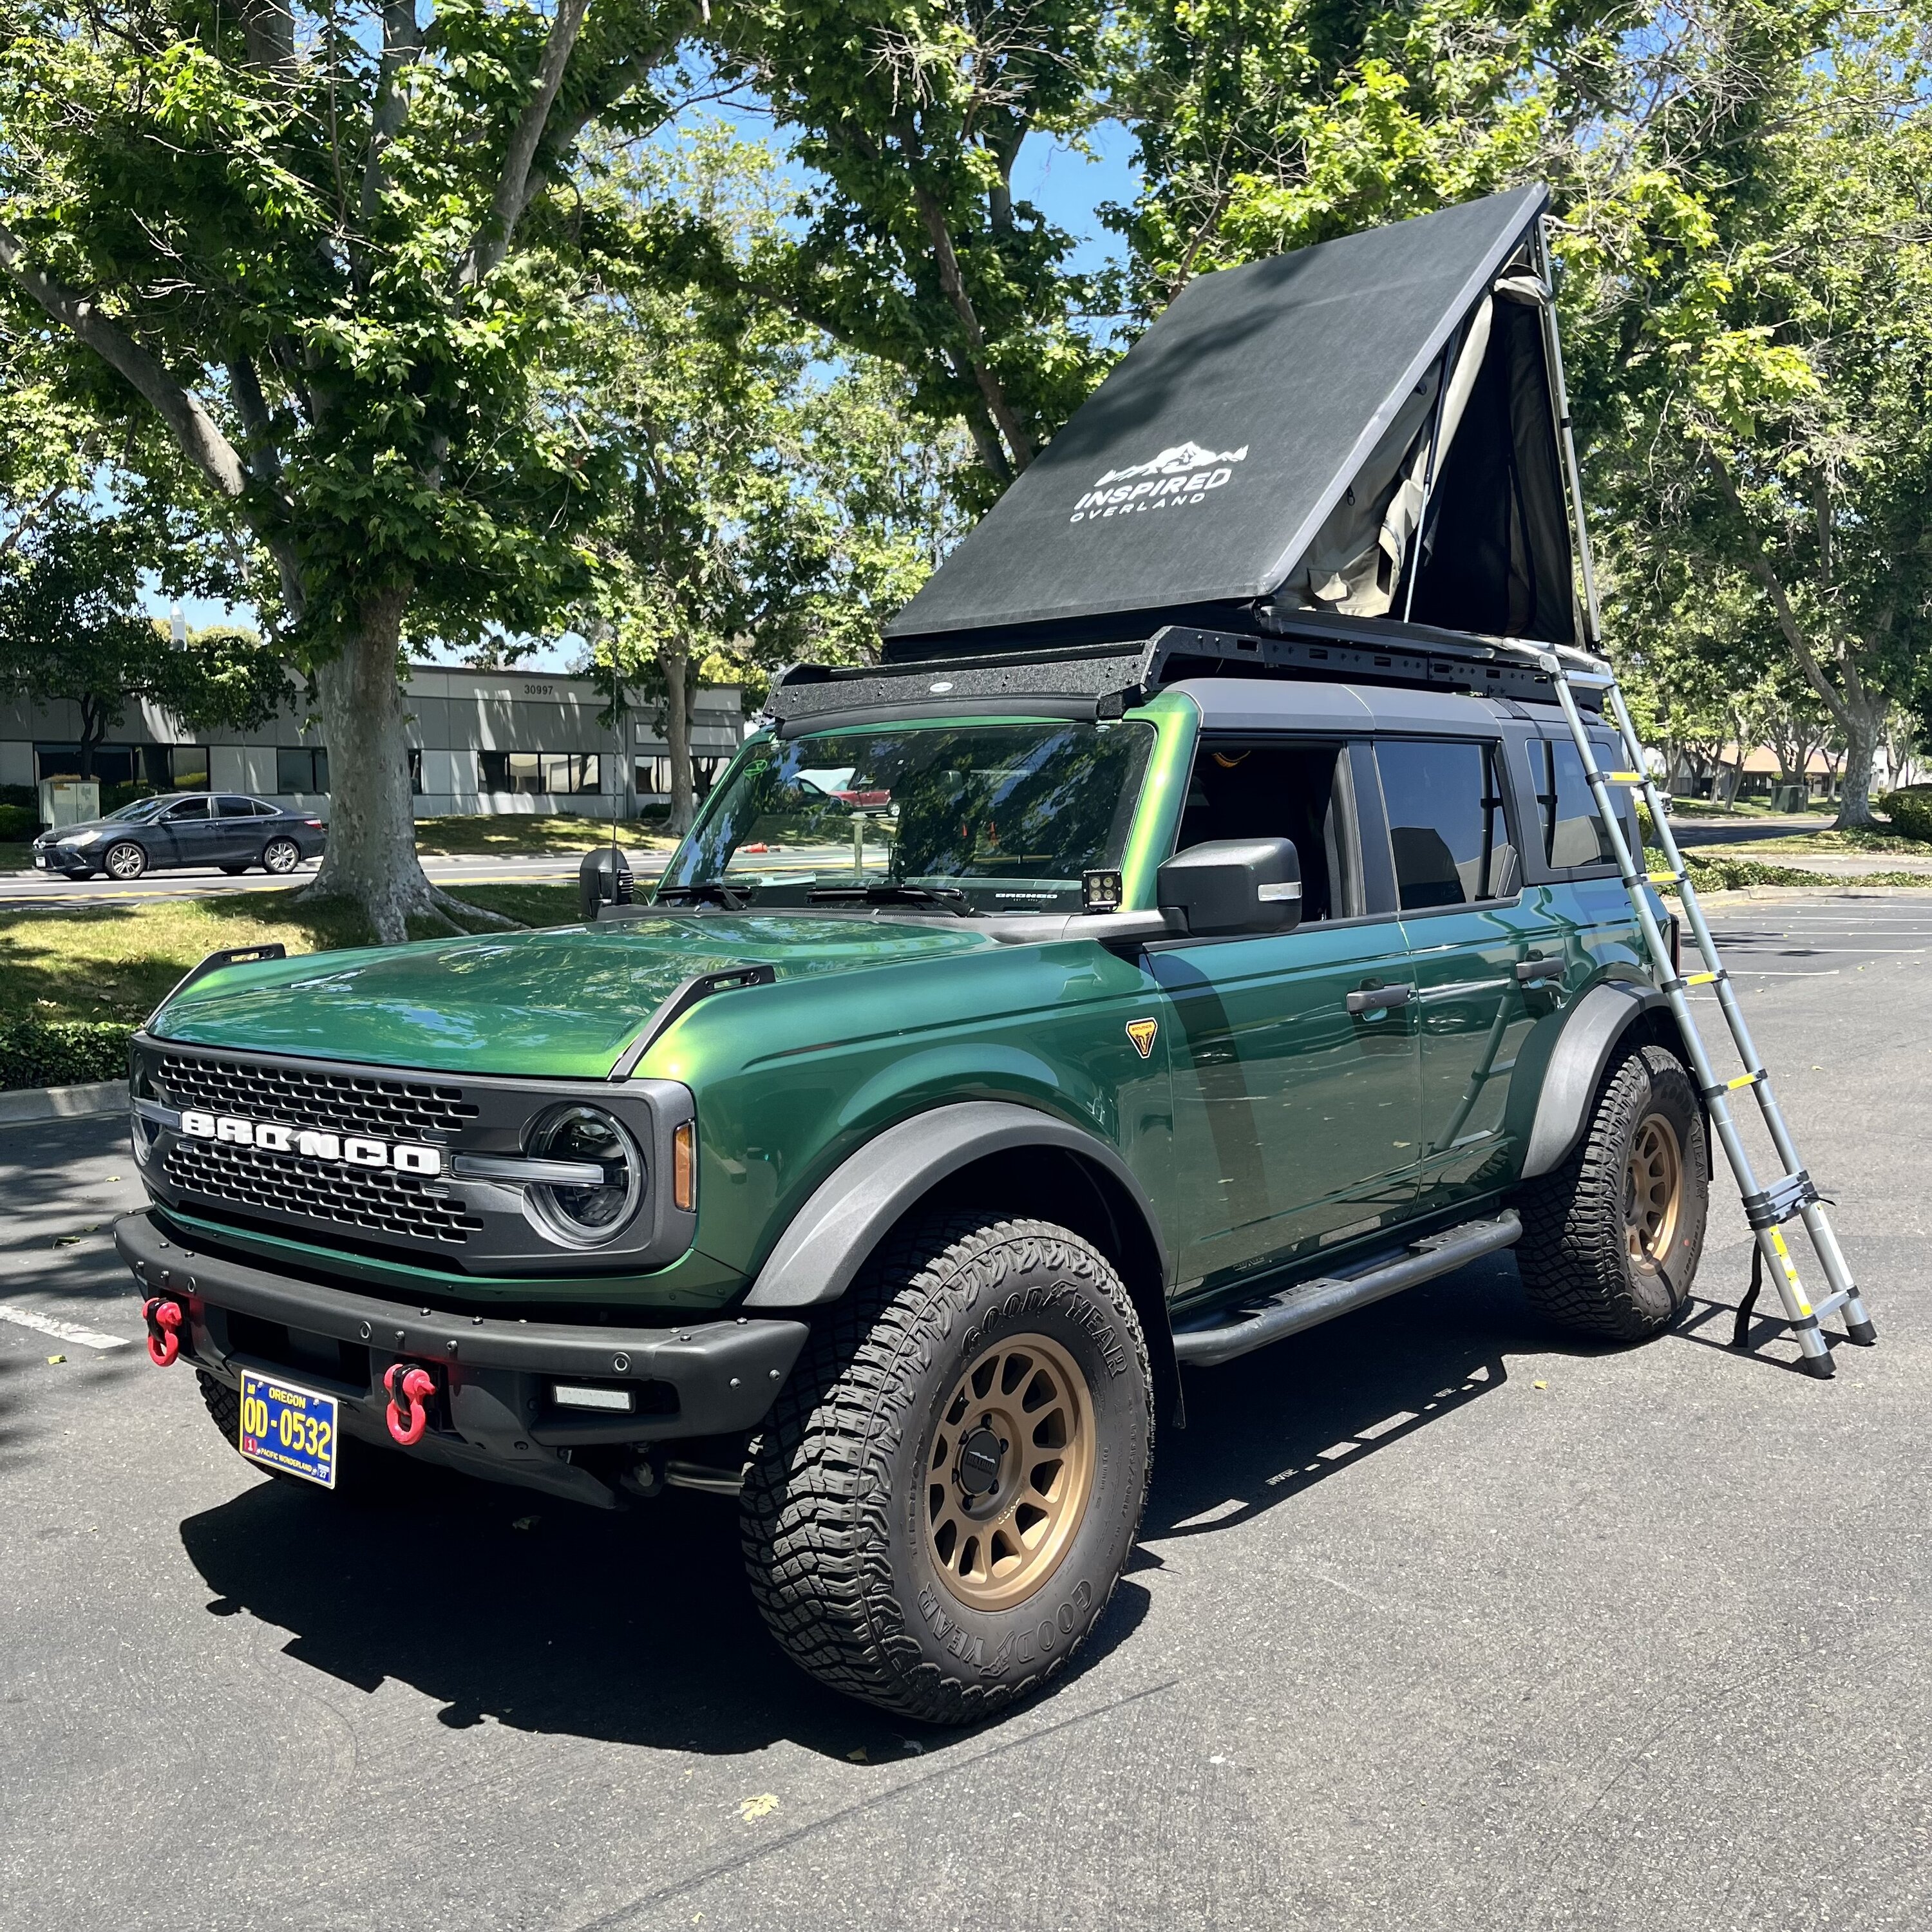 Ford Bronco A Month on the Road - Live Updates IMG_0570